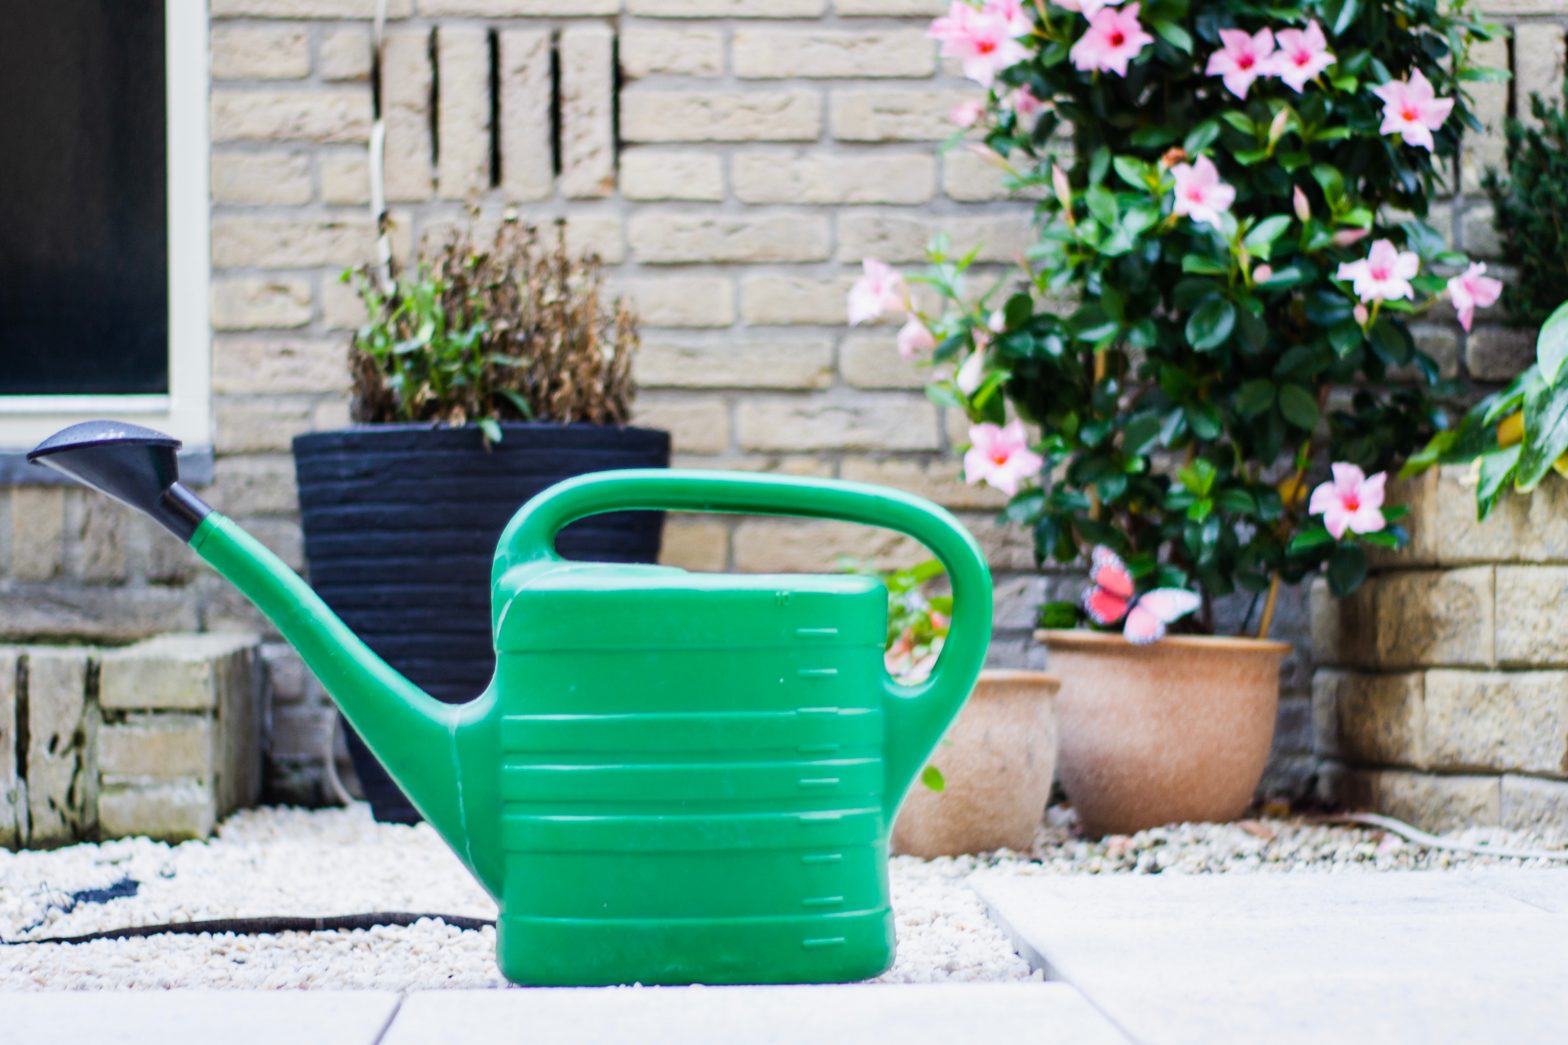 A green watering can sits on the path in front of potted plants